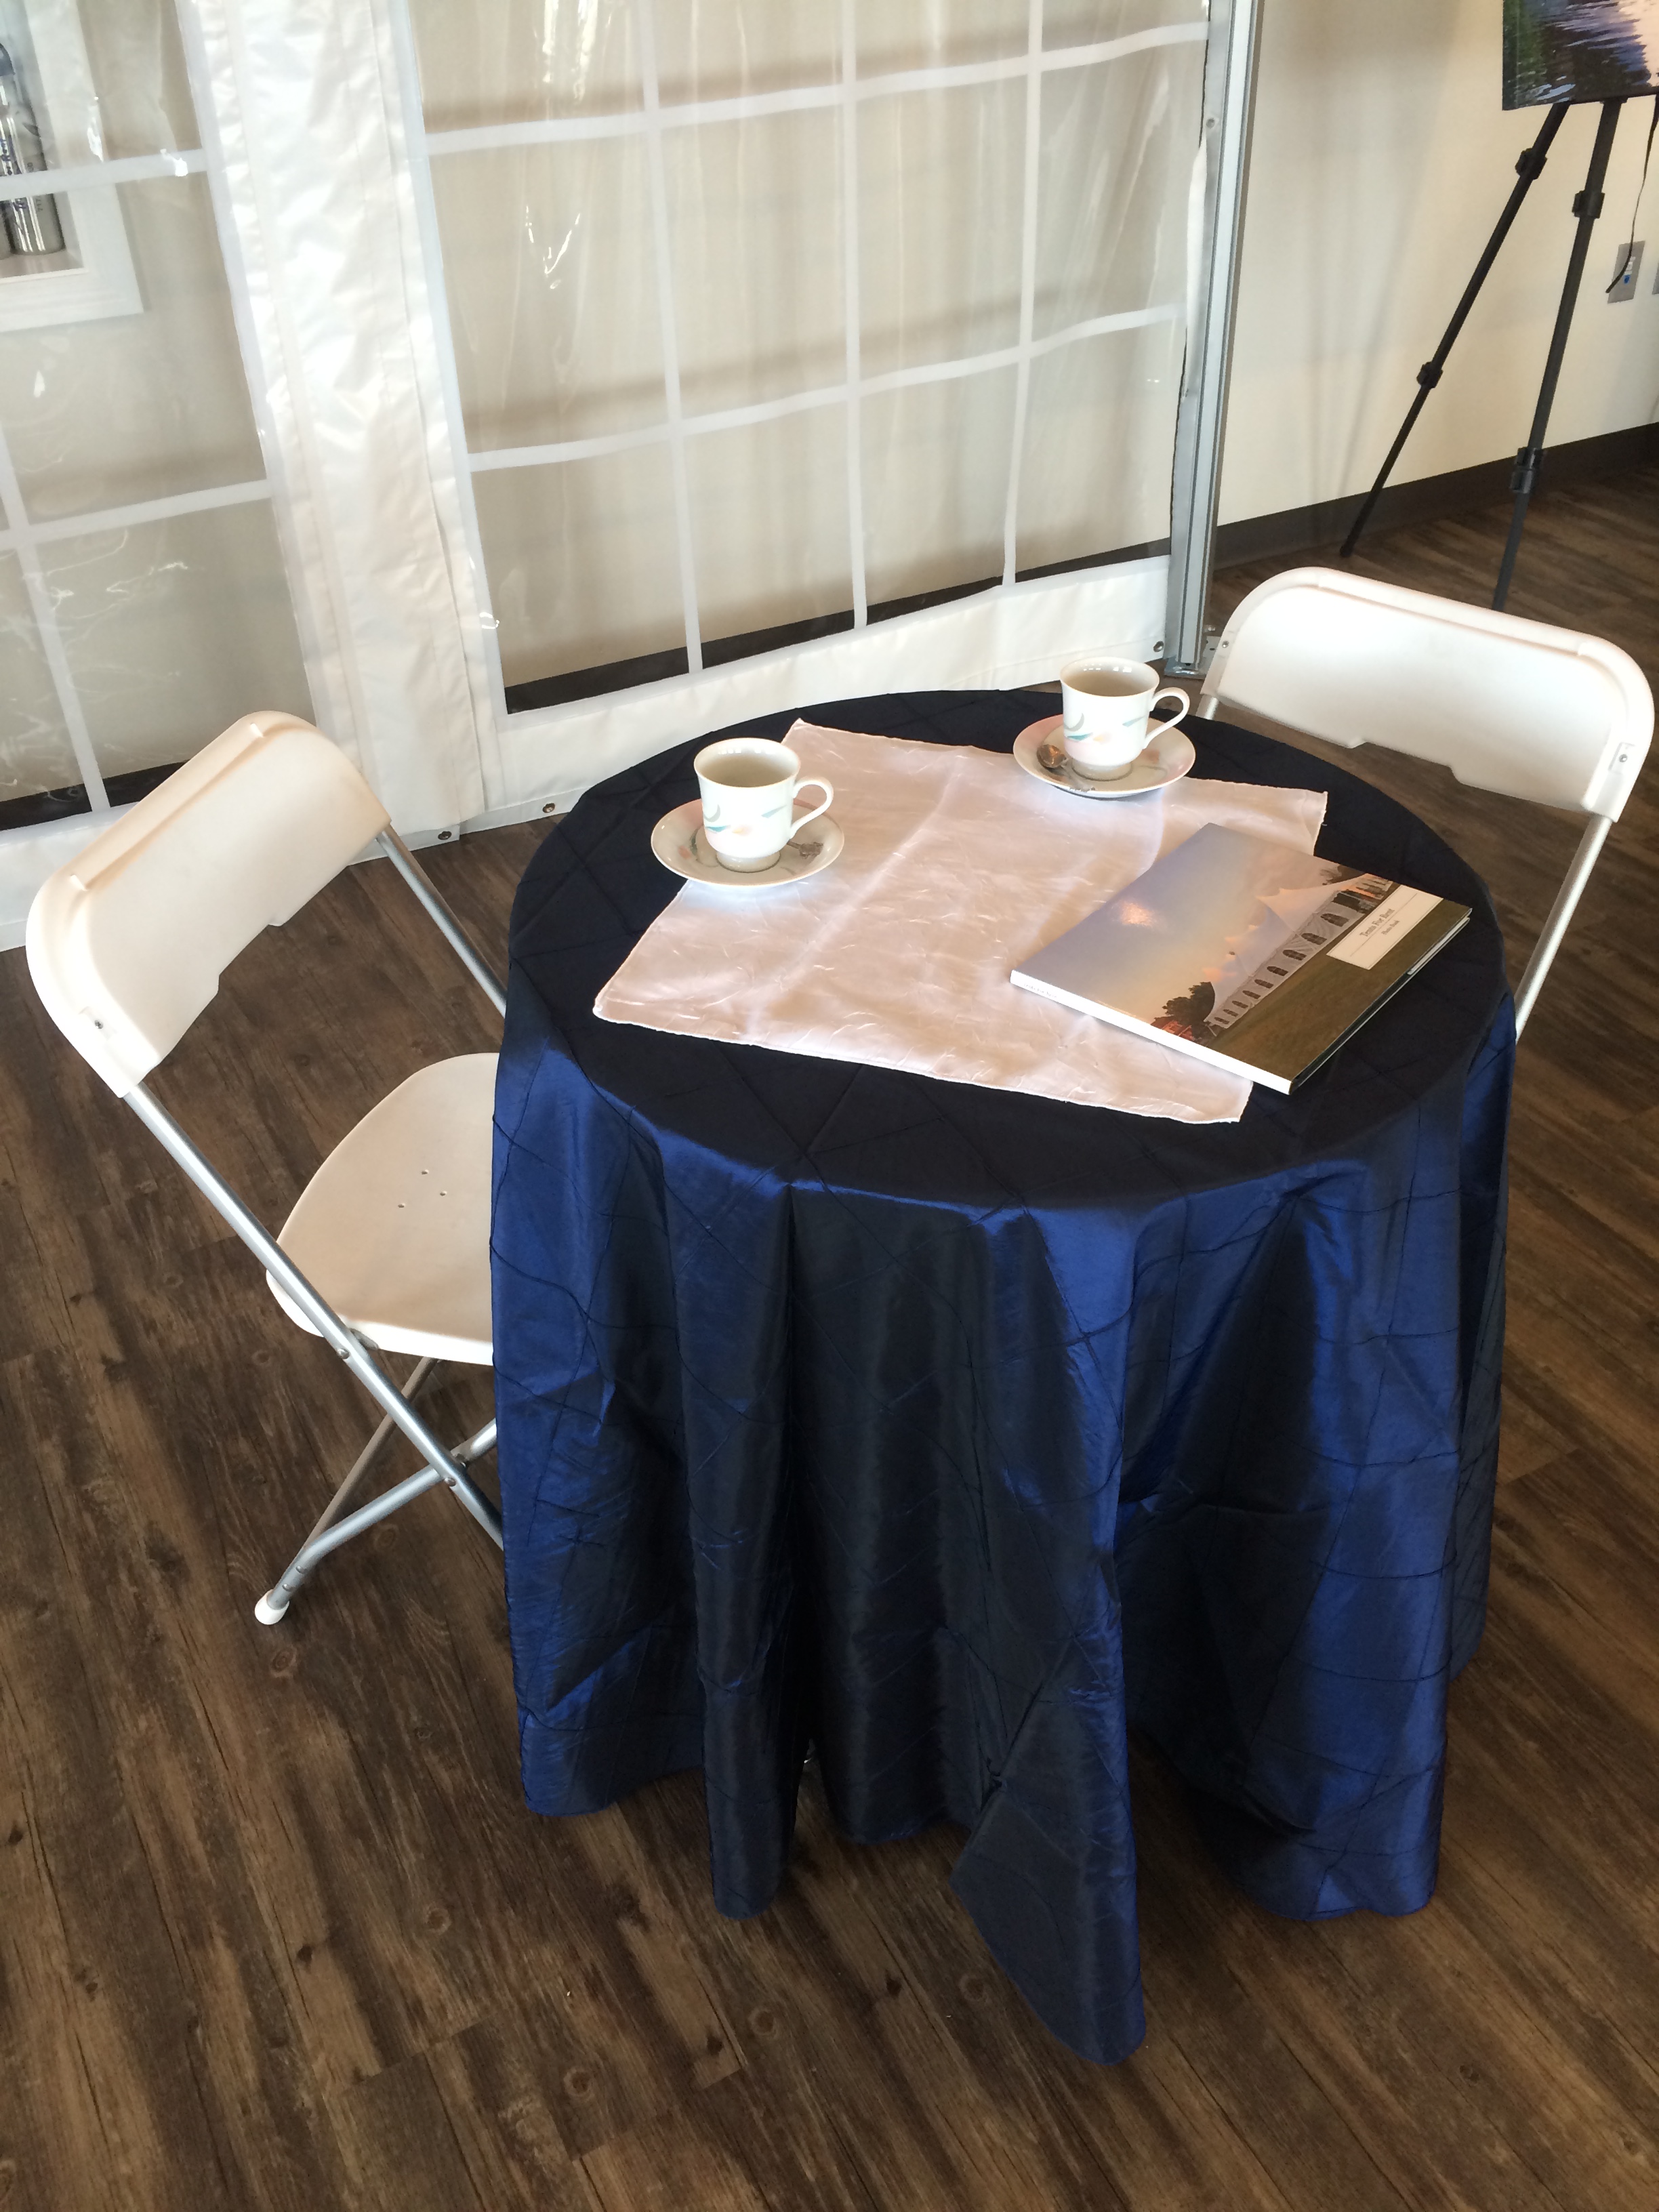 Sweetheart table to rent for your tent wedding